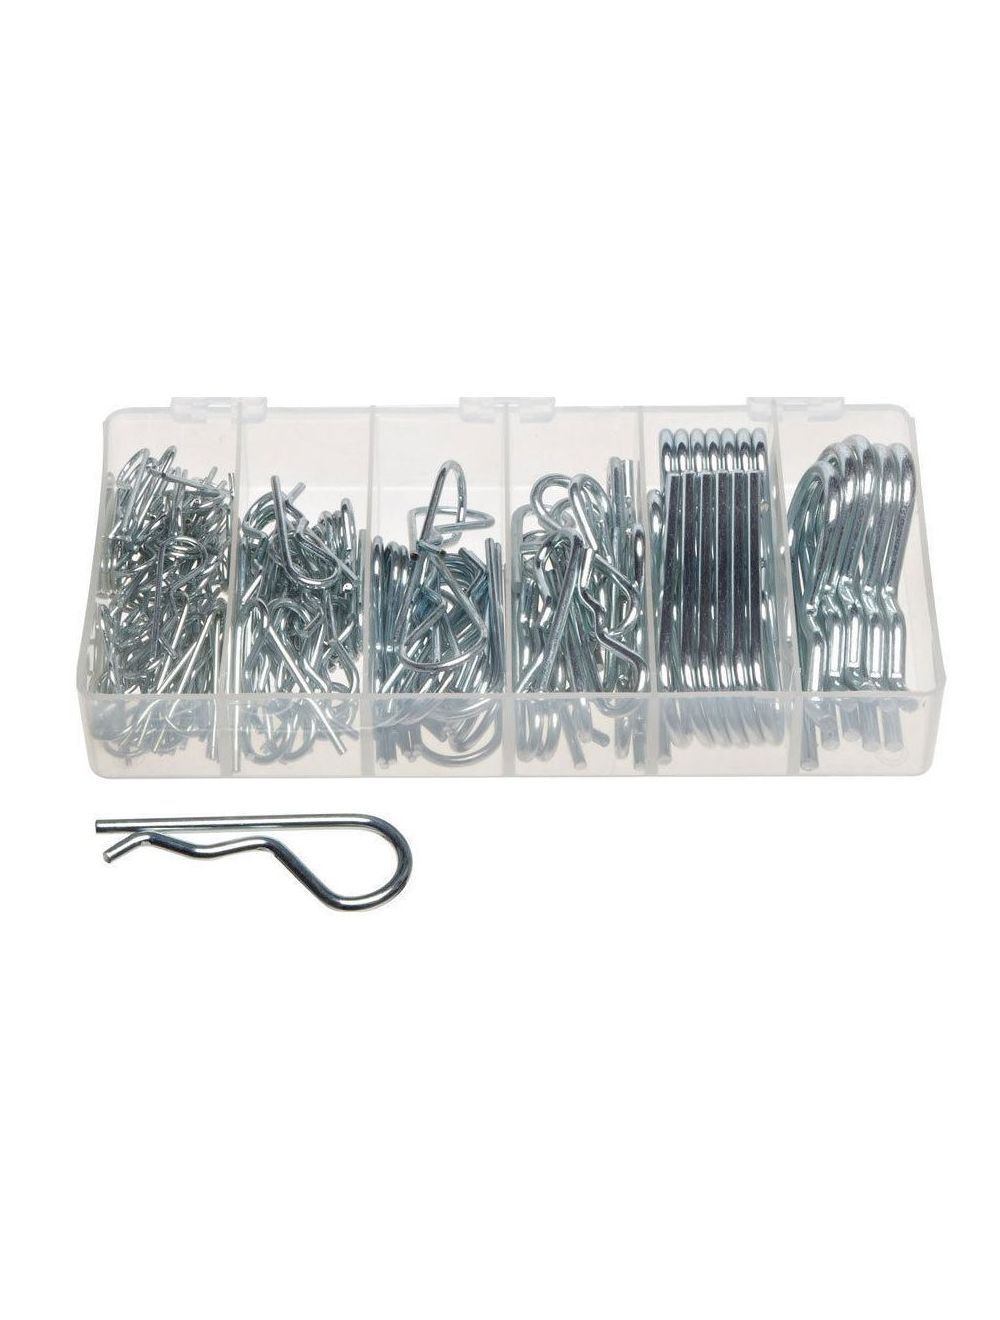 150pc HAIR PIN ASSORTMENT New Cotter 